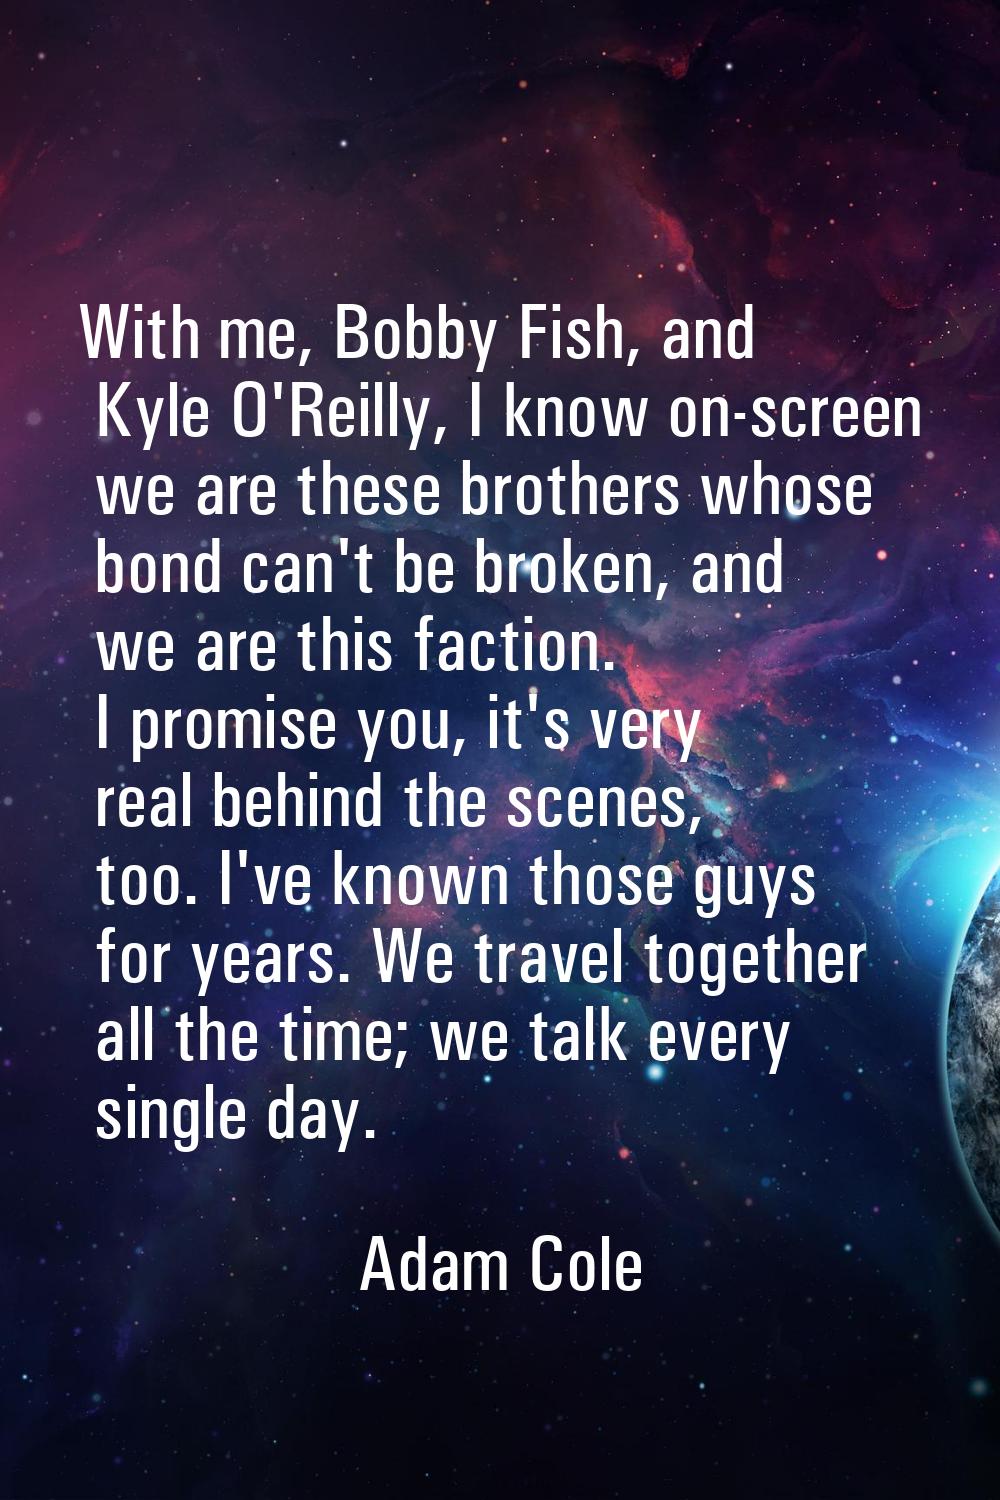 With me, Bobby Fish, and Kyle O'Reilly, I know on-screen we are these brothers whose bond can't be 